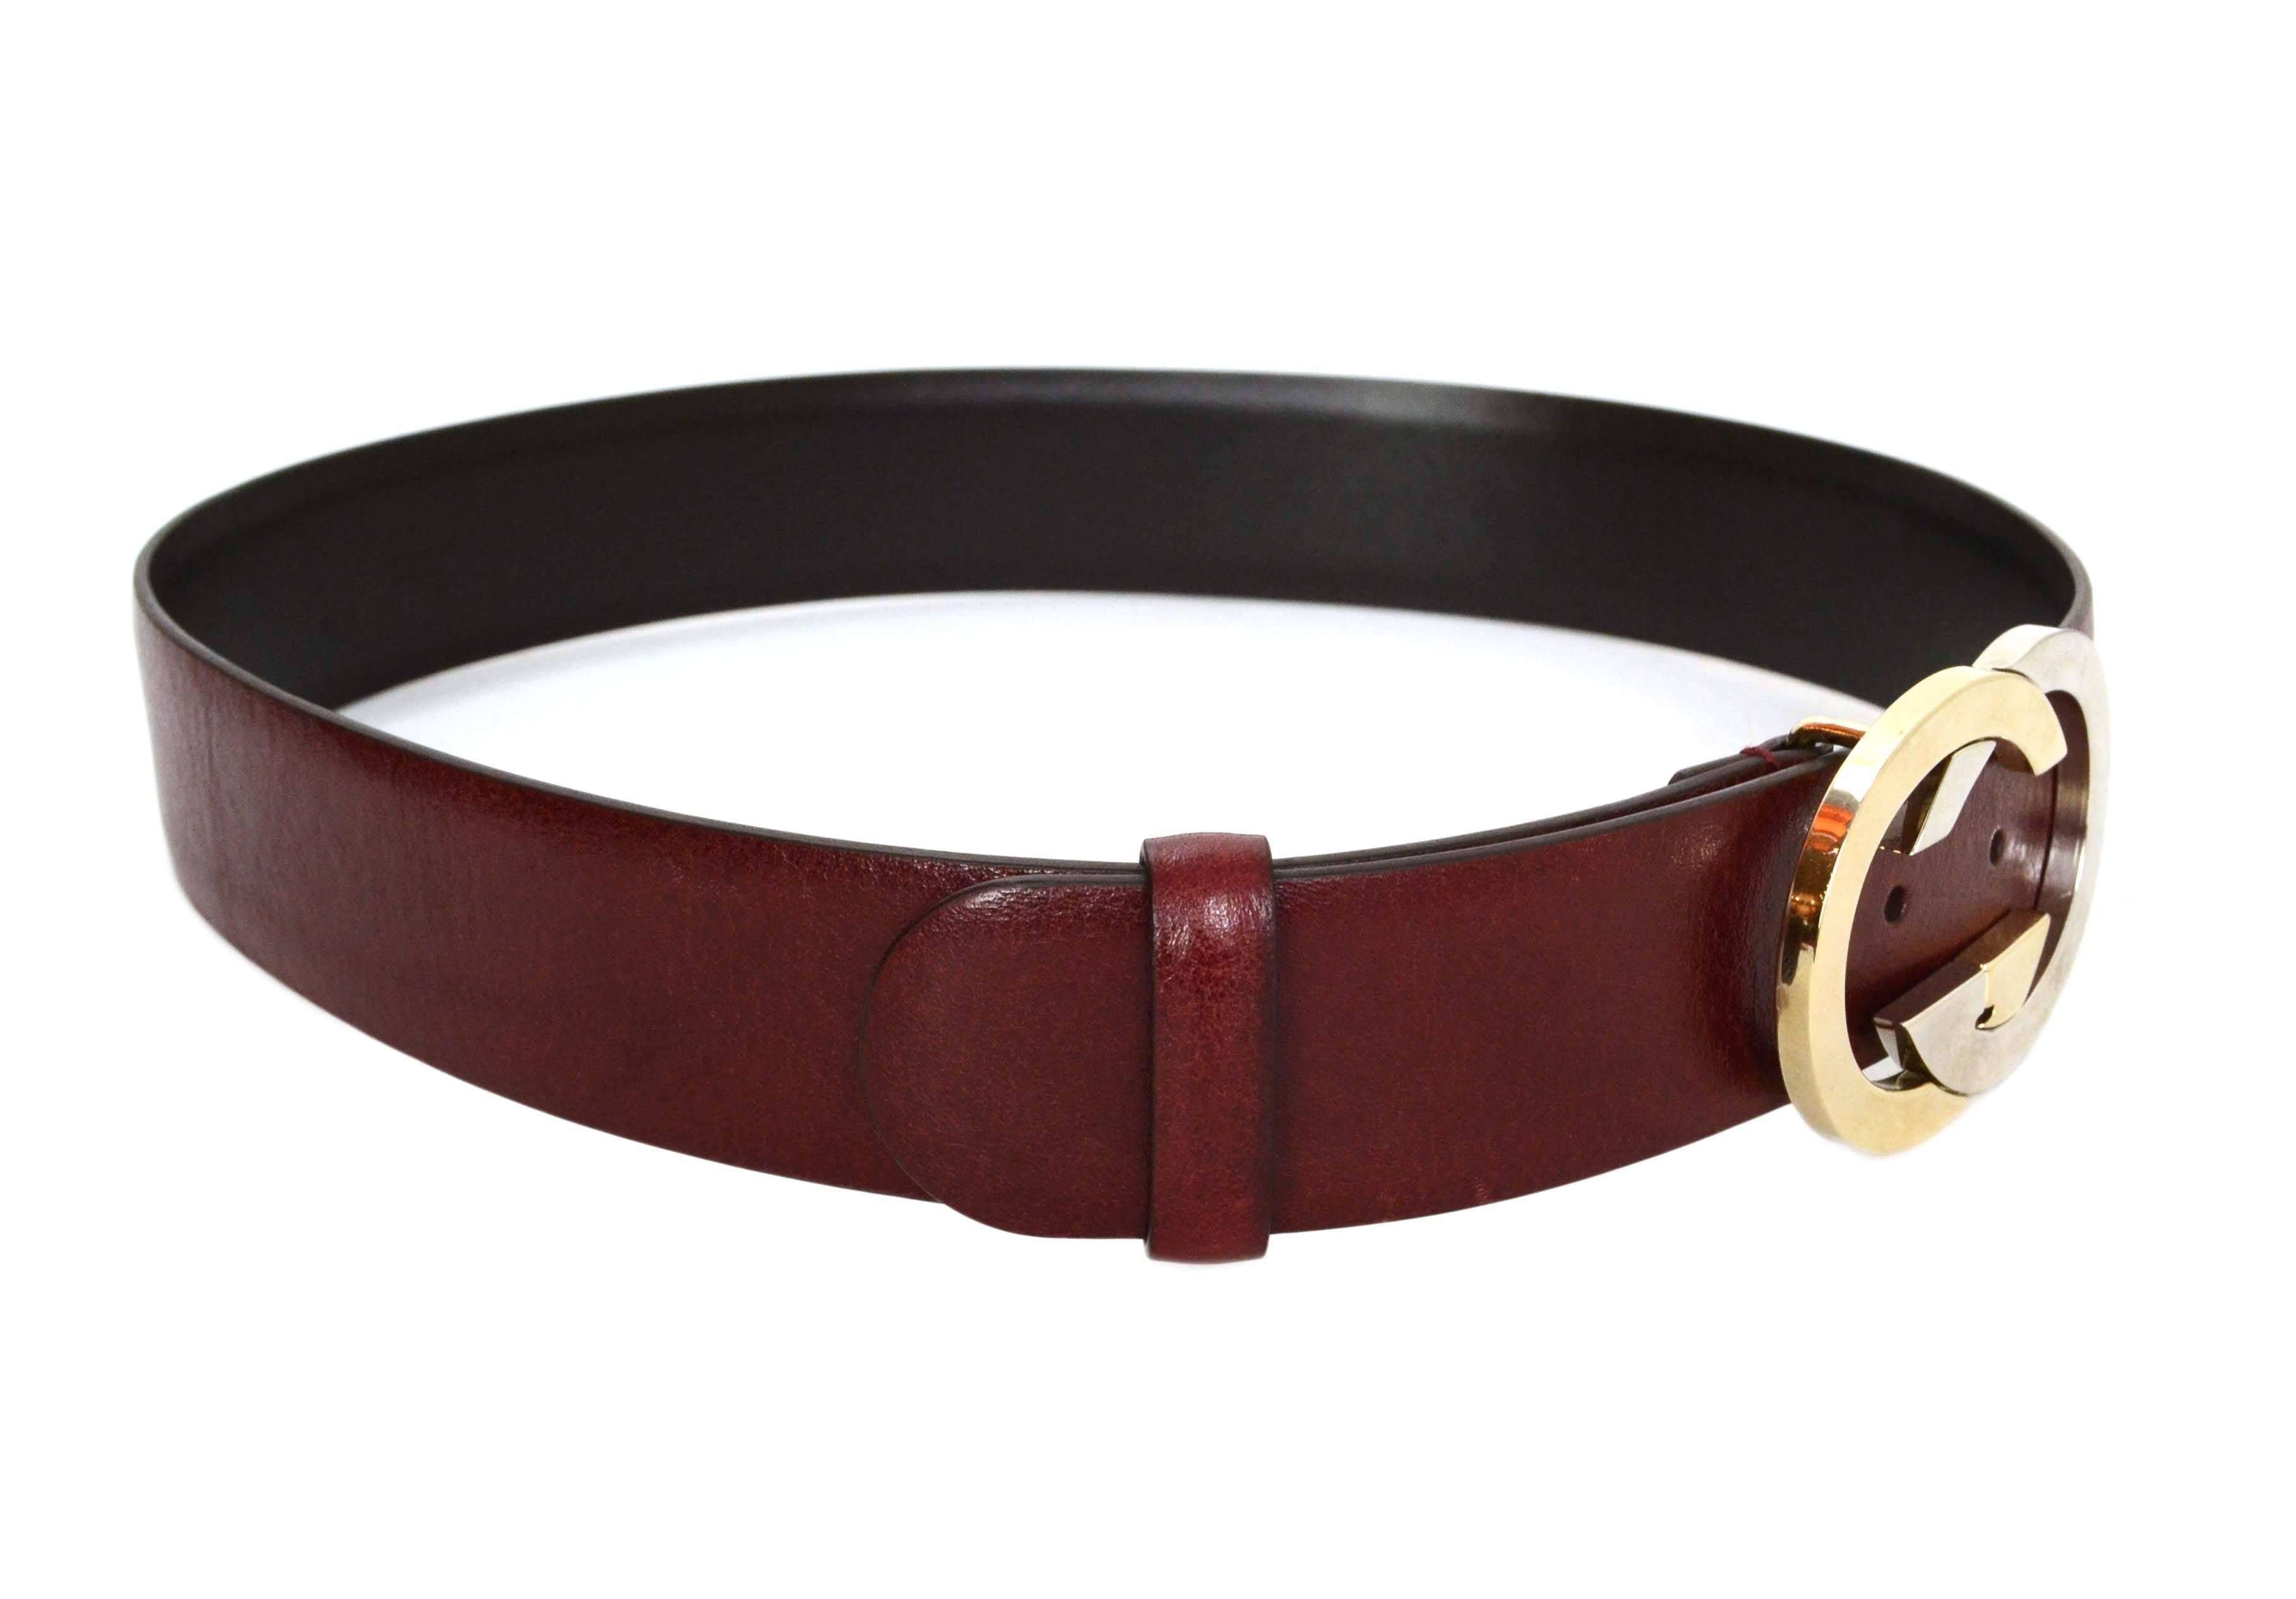 Gucci Burgundy Leather Belt With Two Tone Buckle

Made In: Italy

Color: Burgundy, black

Hardware: Gold and silver

Materials: Leather, metal

Serial Number/Date Code: 132172-479610-80-32

Retail Price: $300 + tax

Overall Condition: